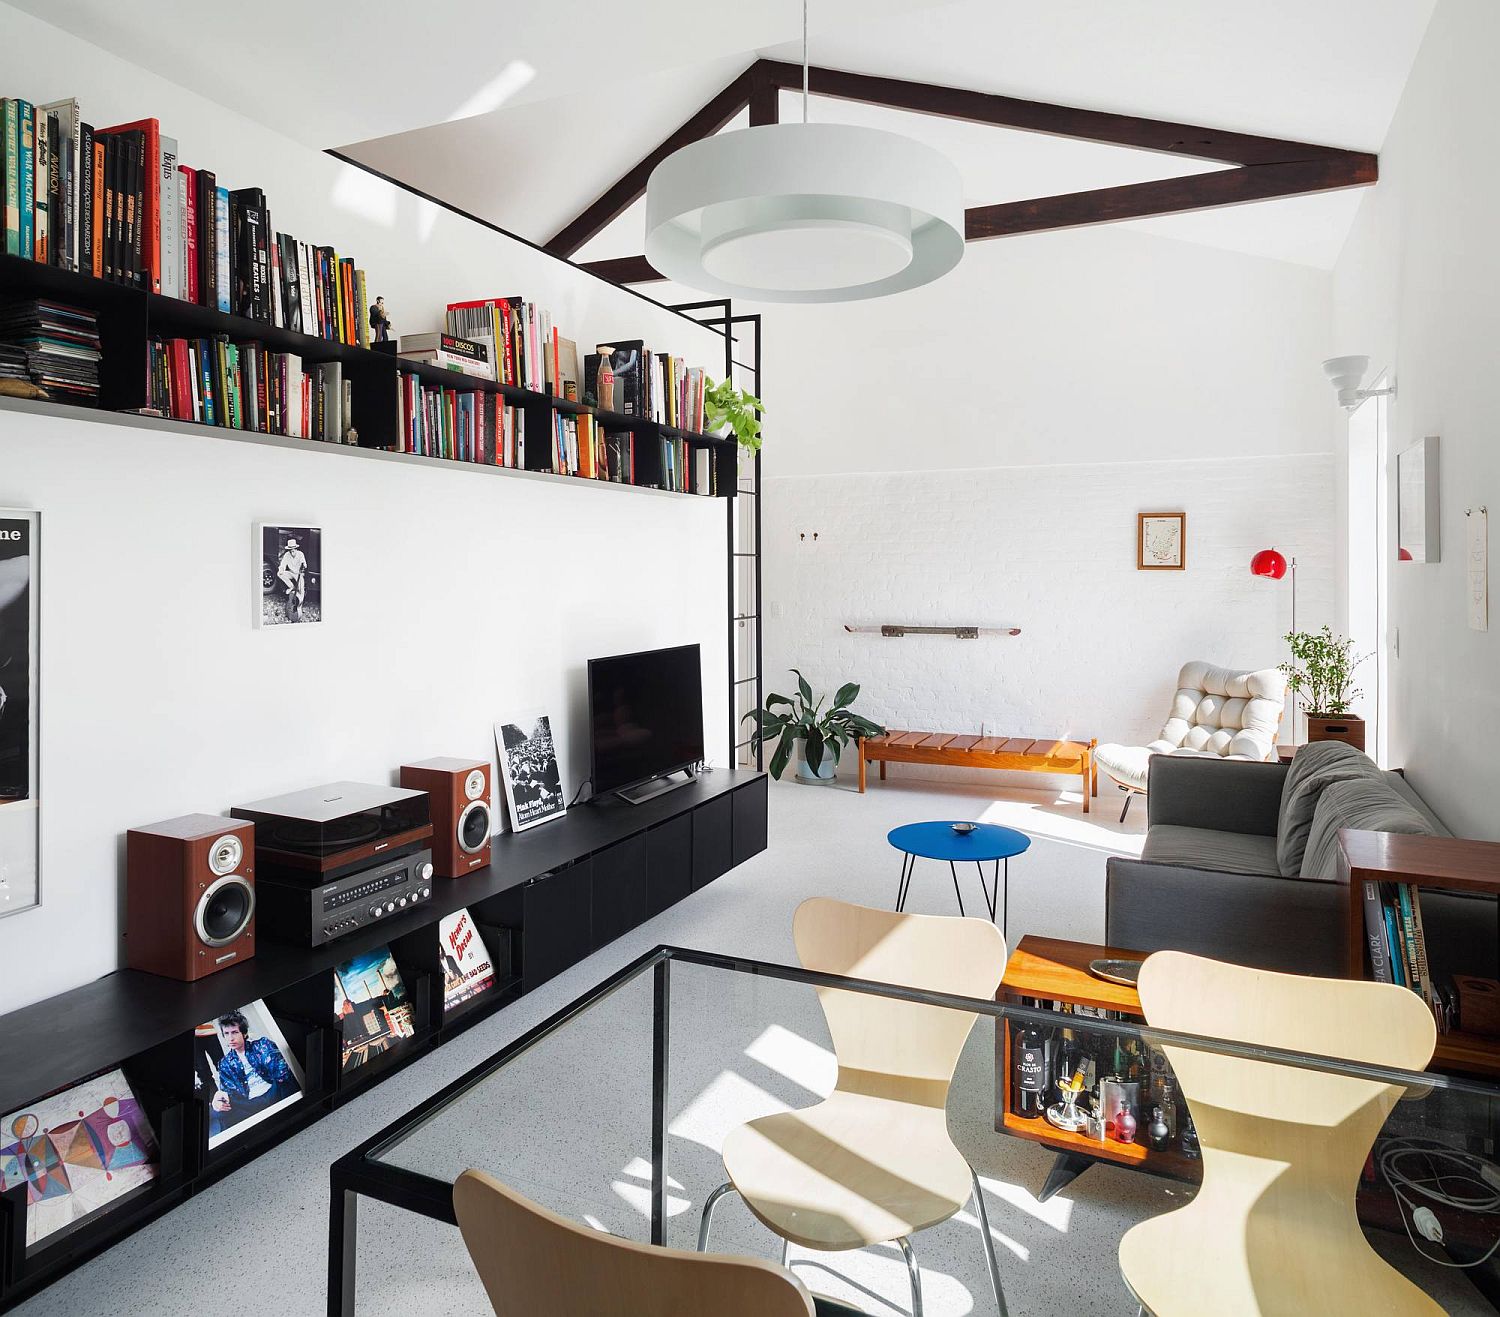 Small-space-savvy-apartment-has-a-living-room-with-bookshelf-that-is-placed-above-entertainment-unit